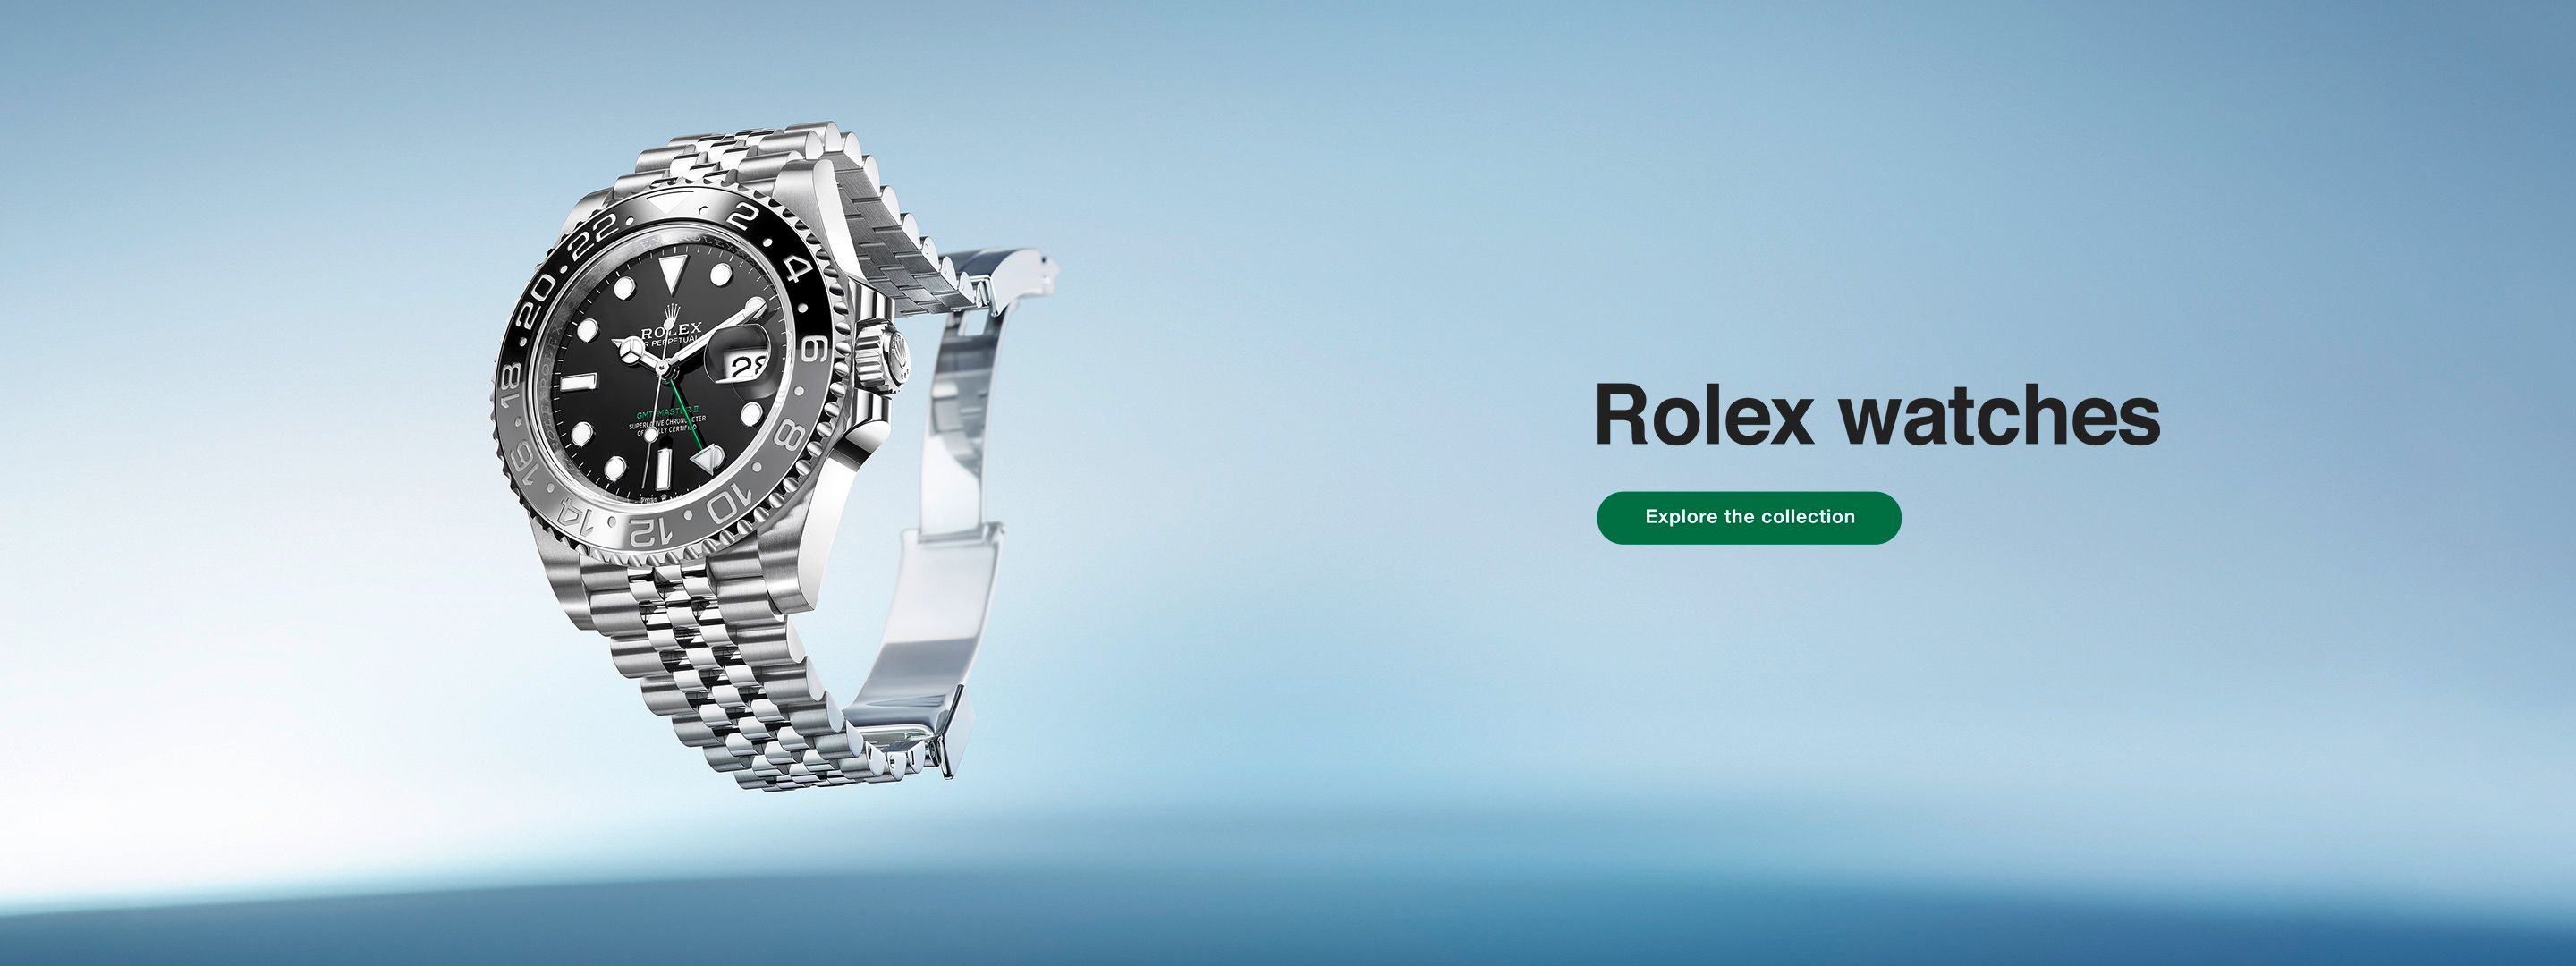 Discover the Rolex watches